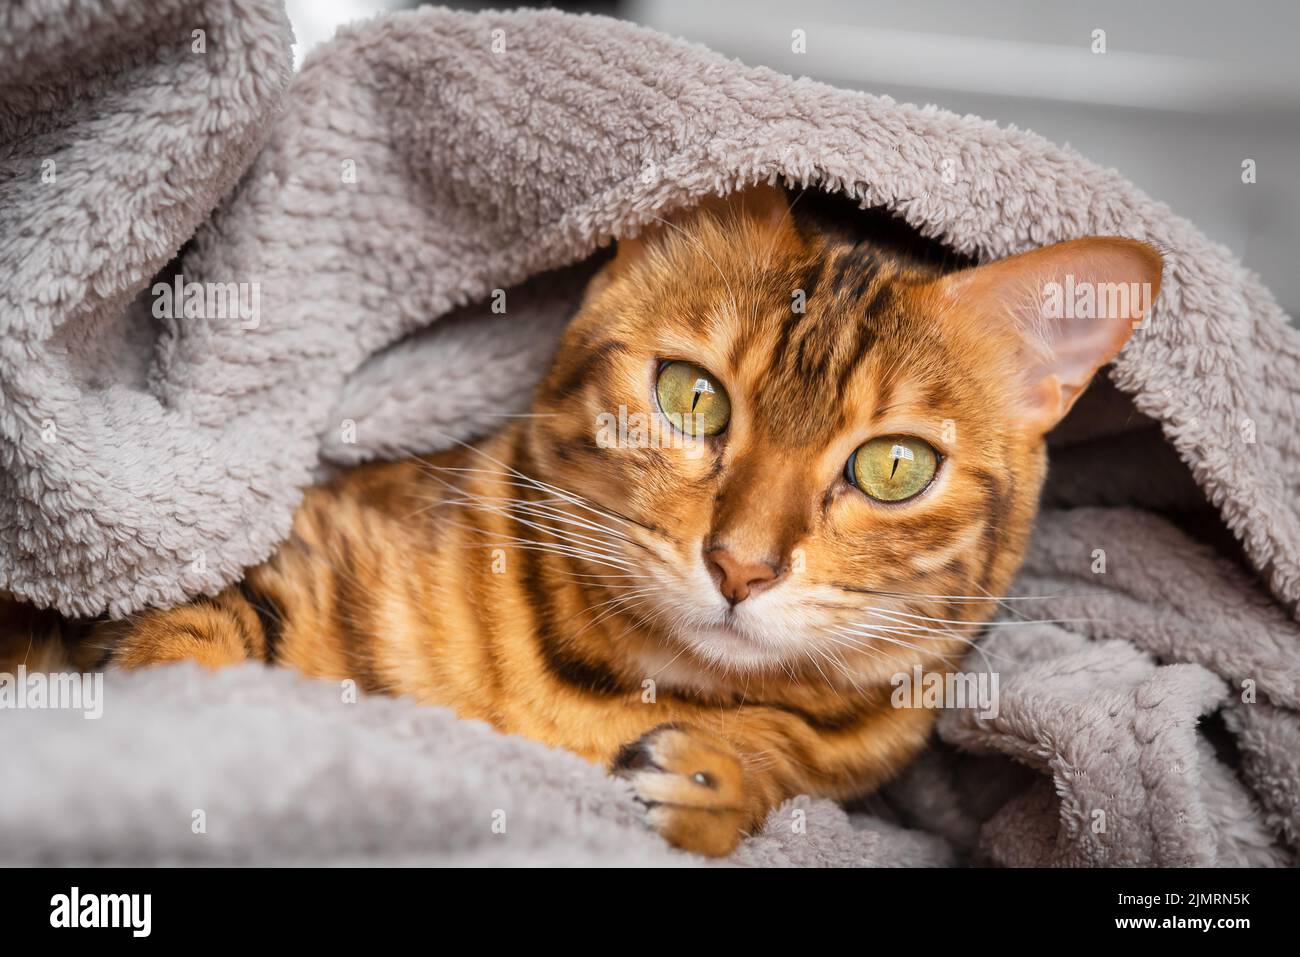 470+ Cat Hiding Inside The Blanket Stock Photos, Pictures